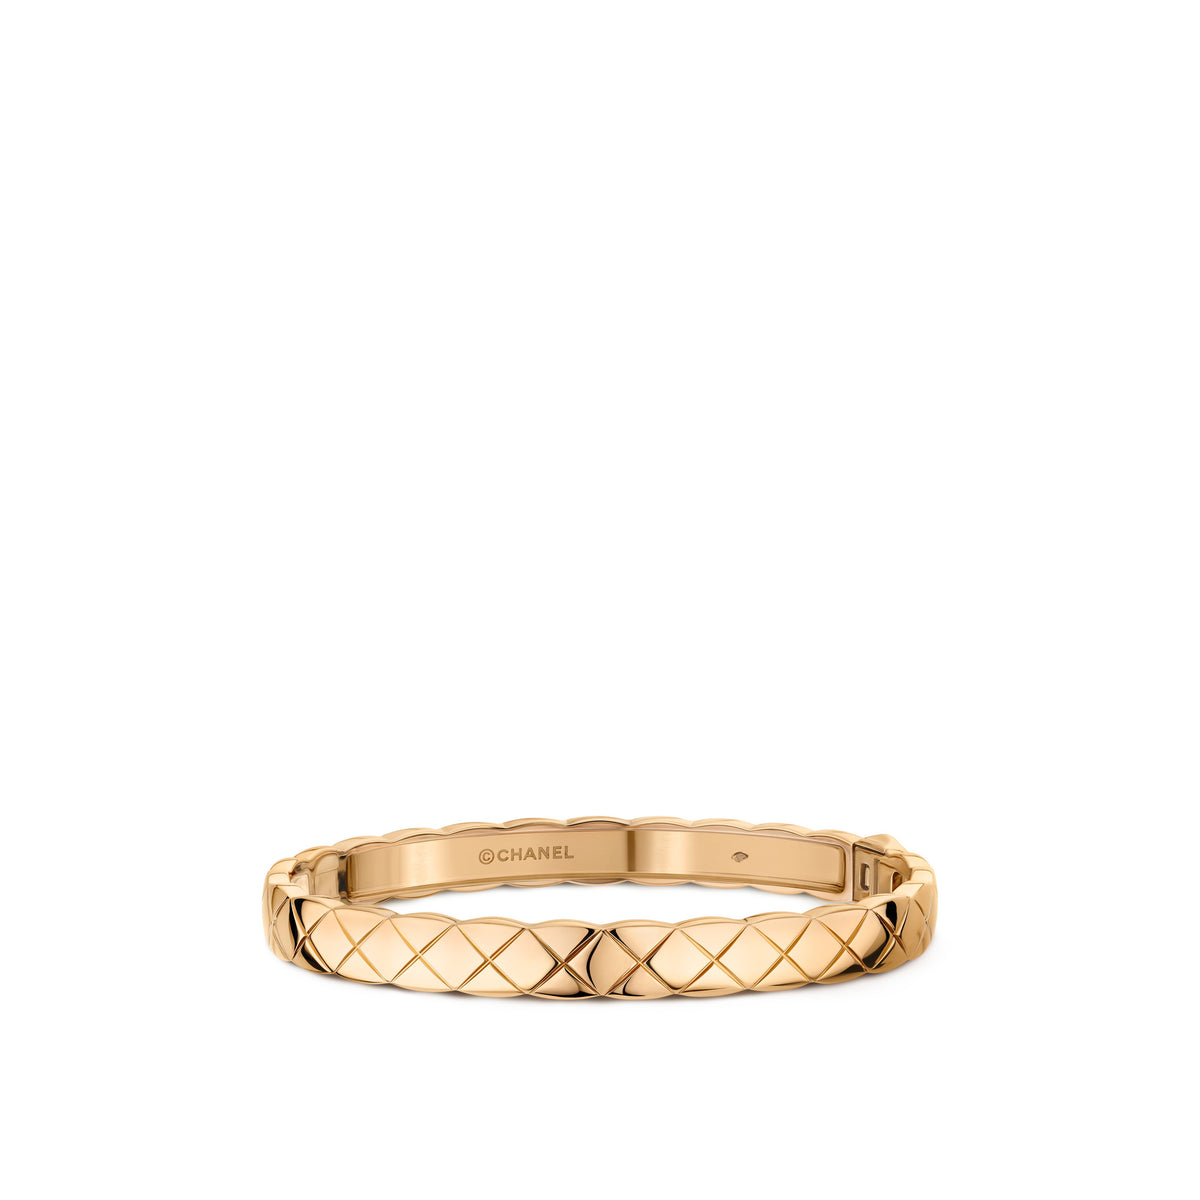 Chanel Coco Crush Bracelet in Yellow Gold with Diamonds– CD Peacock